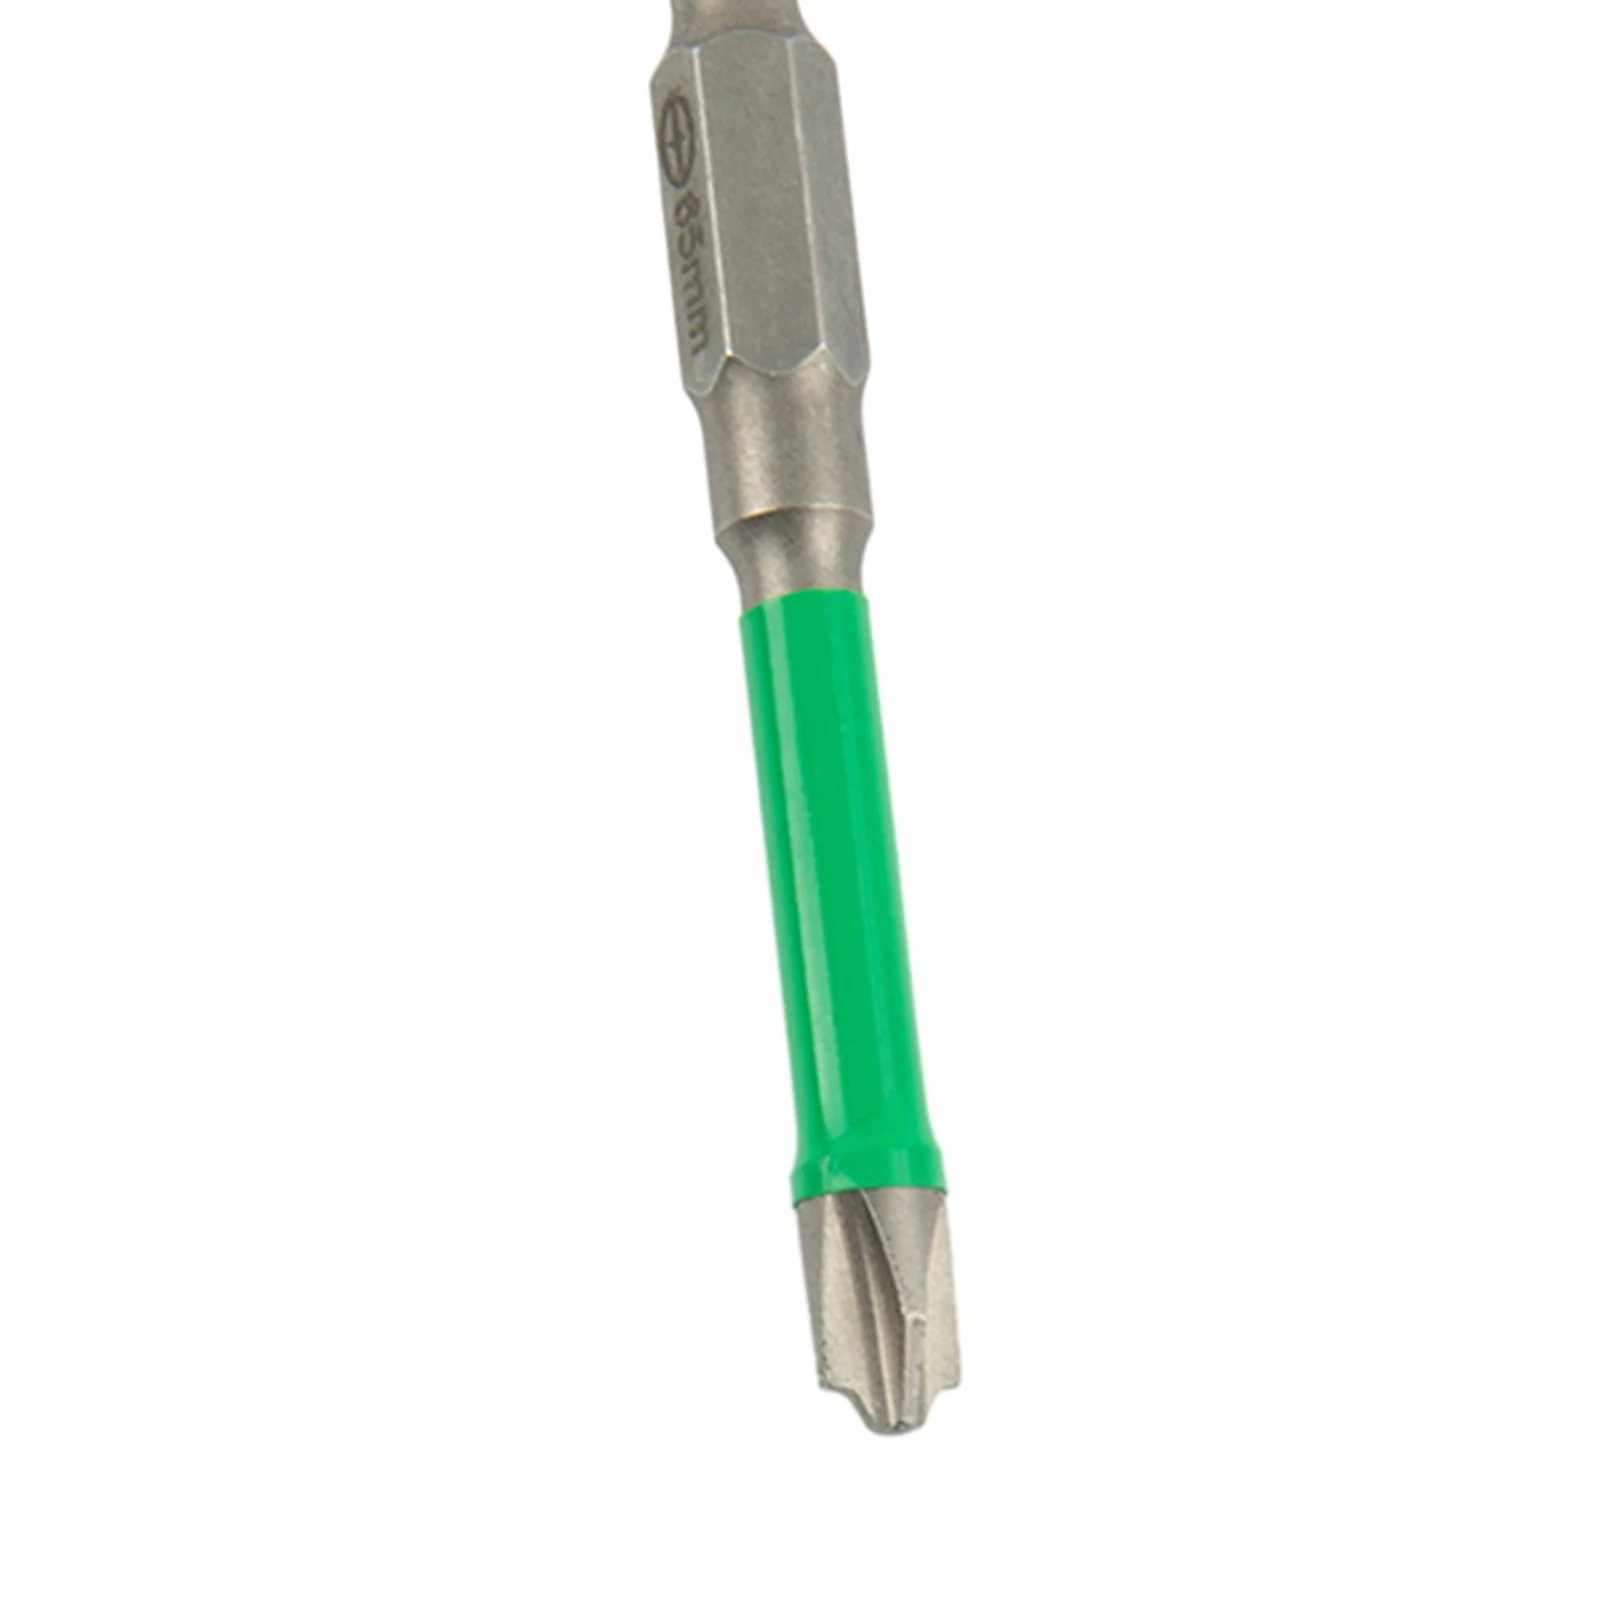 High Hardness Magnetic Special Cross Screwdriver Bit FPH2 55mm Head Option for 65mm/110mm or 65mm+110mm Length 65mm 110mm magnetic special slotted cross screwdriver bit for electrician fph2 batch head wind impact driver bit hand tools